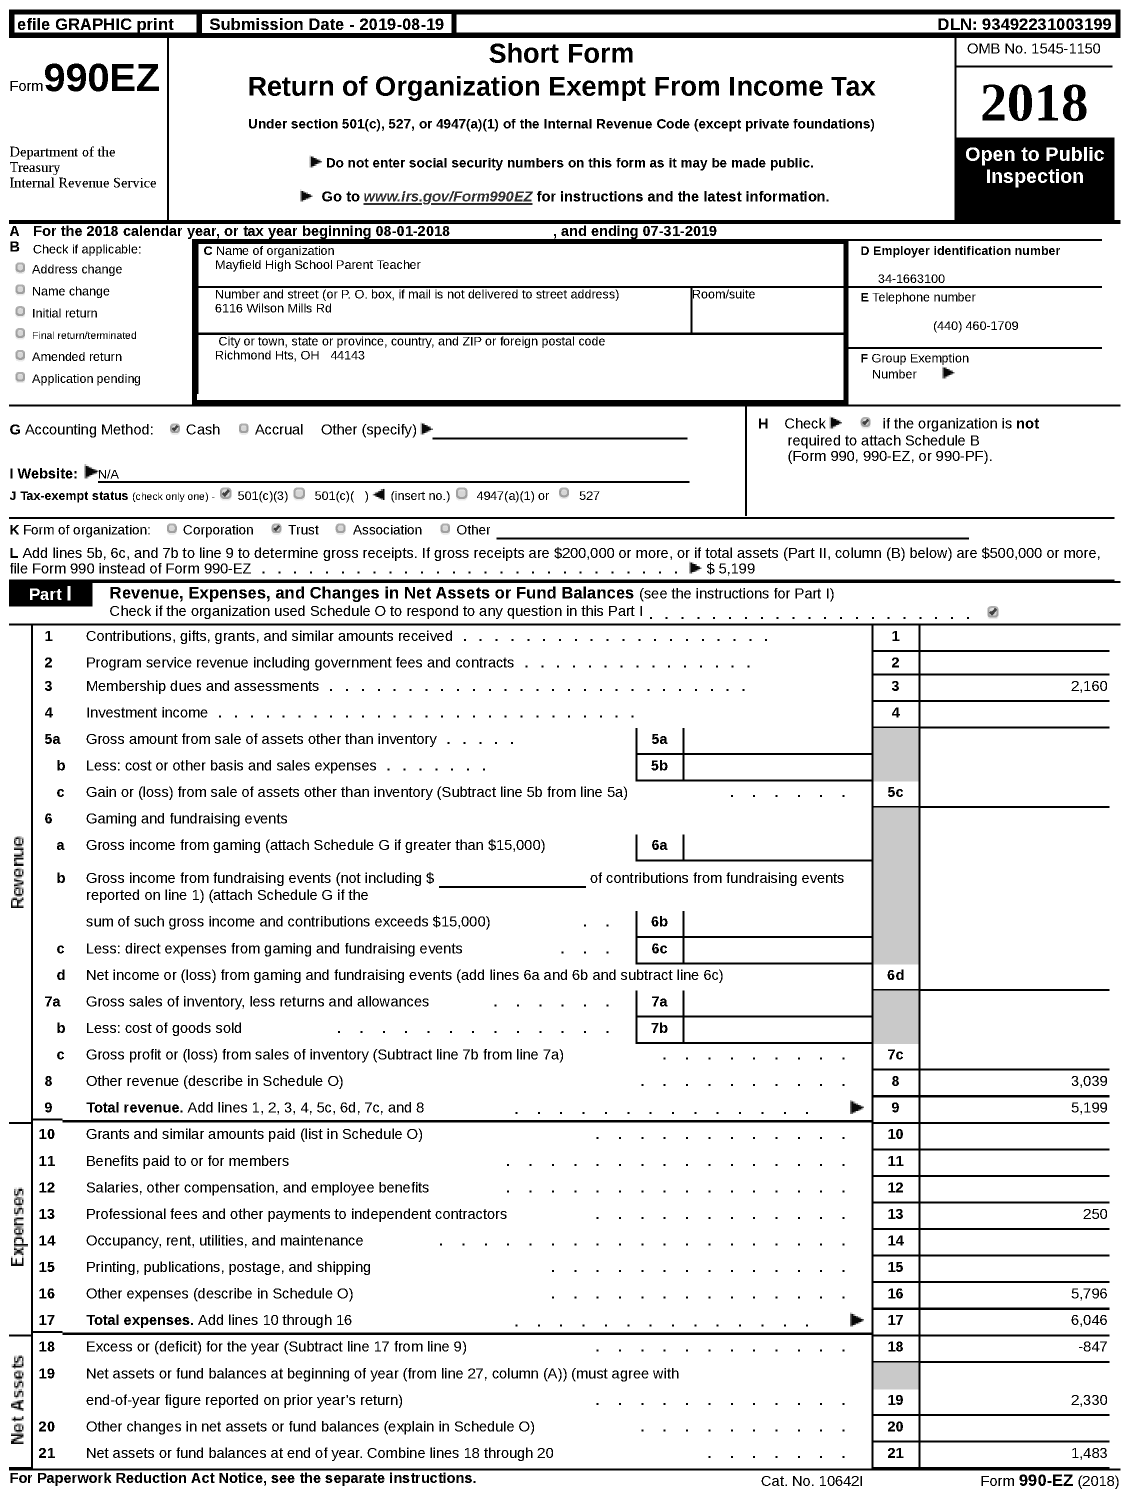 Image of first page of 2018 Form 990EZ for Mayfield High School Parent Teacher